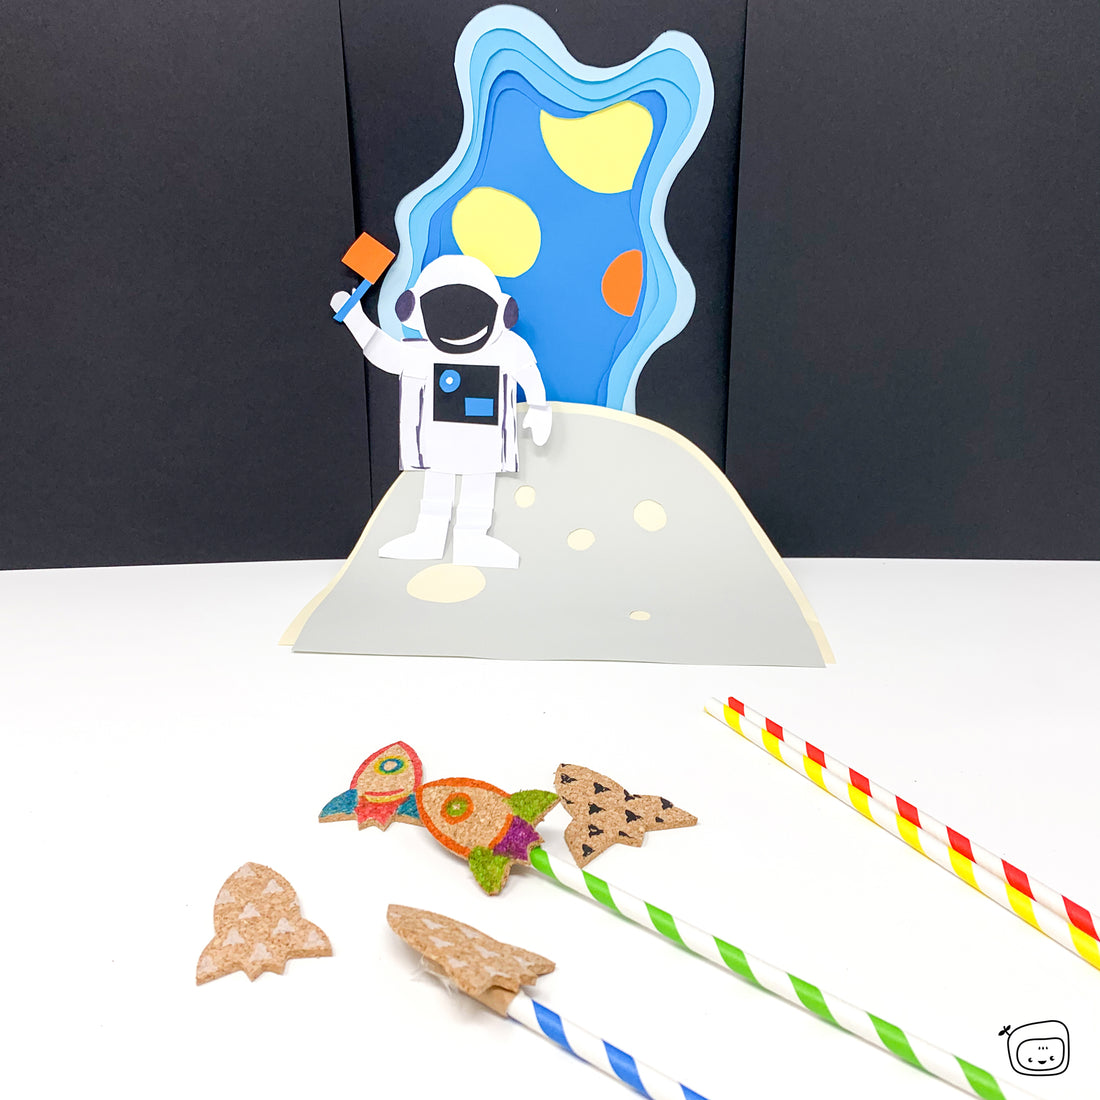 Reach the Moon craft for kids - rocket straw game, cork rocket UFO shapes, paper crafts with Adventure Jumbo Box Craft Kit PepMelon